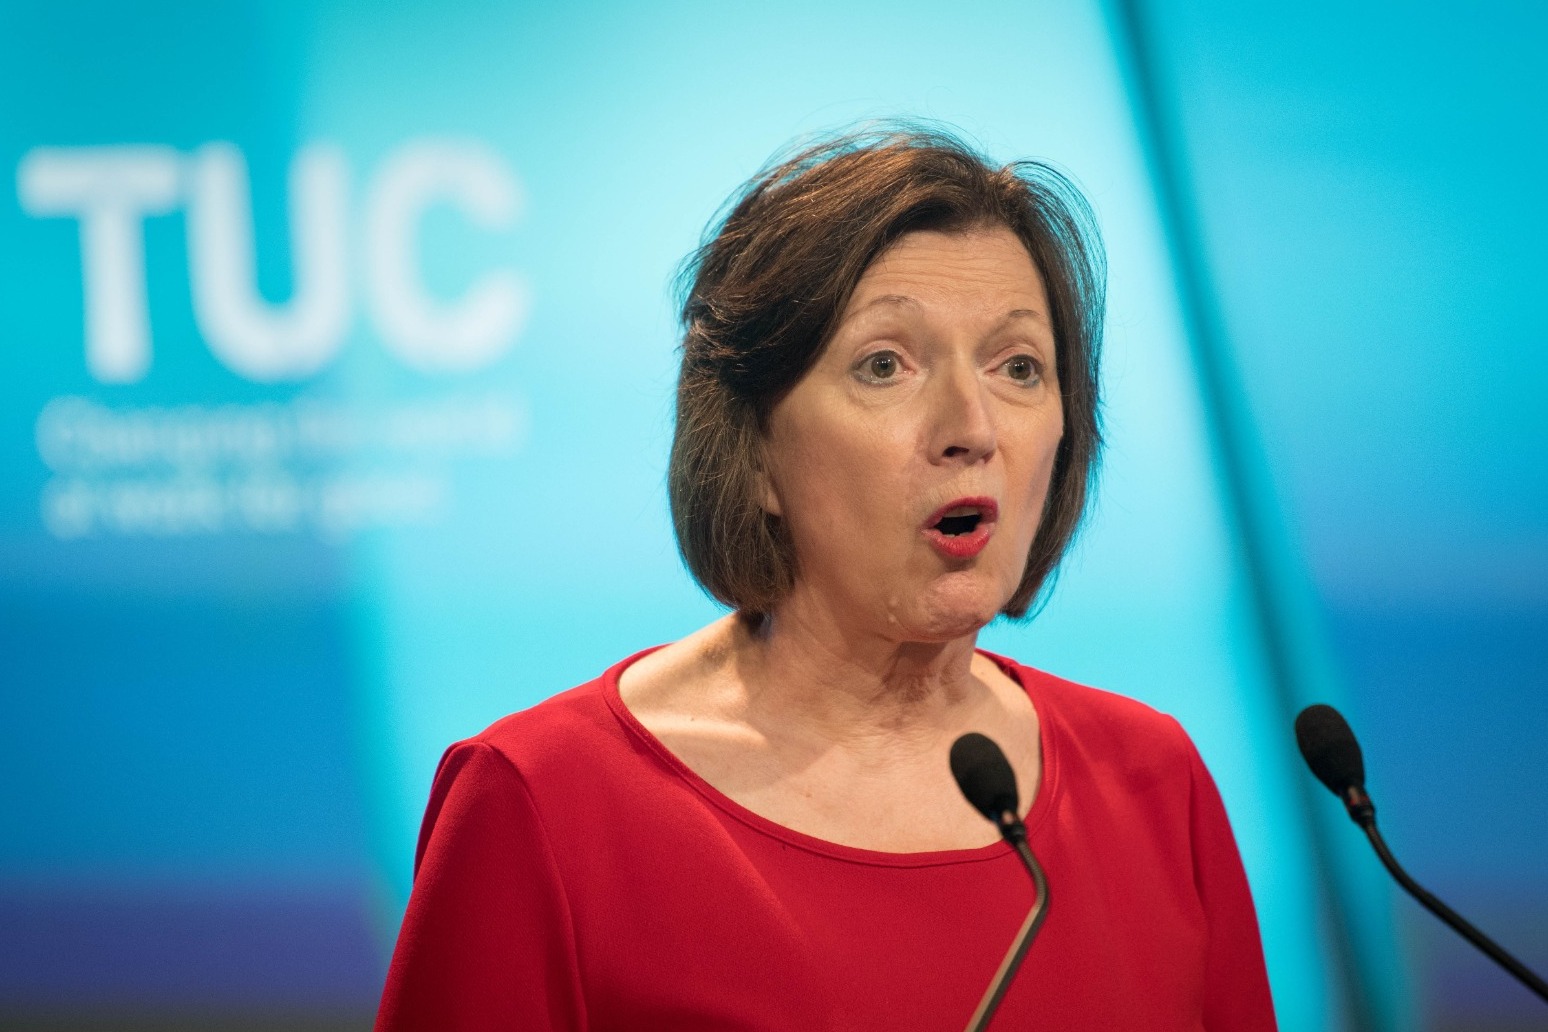 TUC calls on Government to move towards £15 an hour minimum wage 